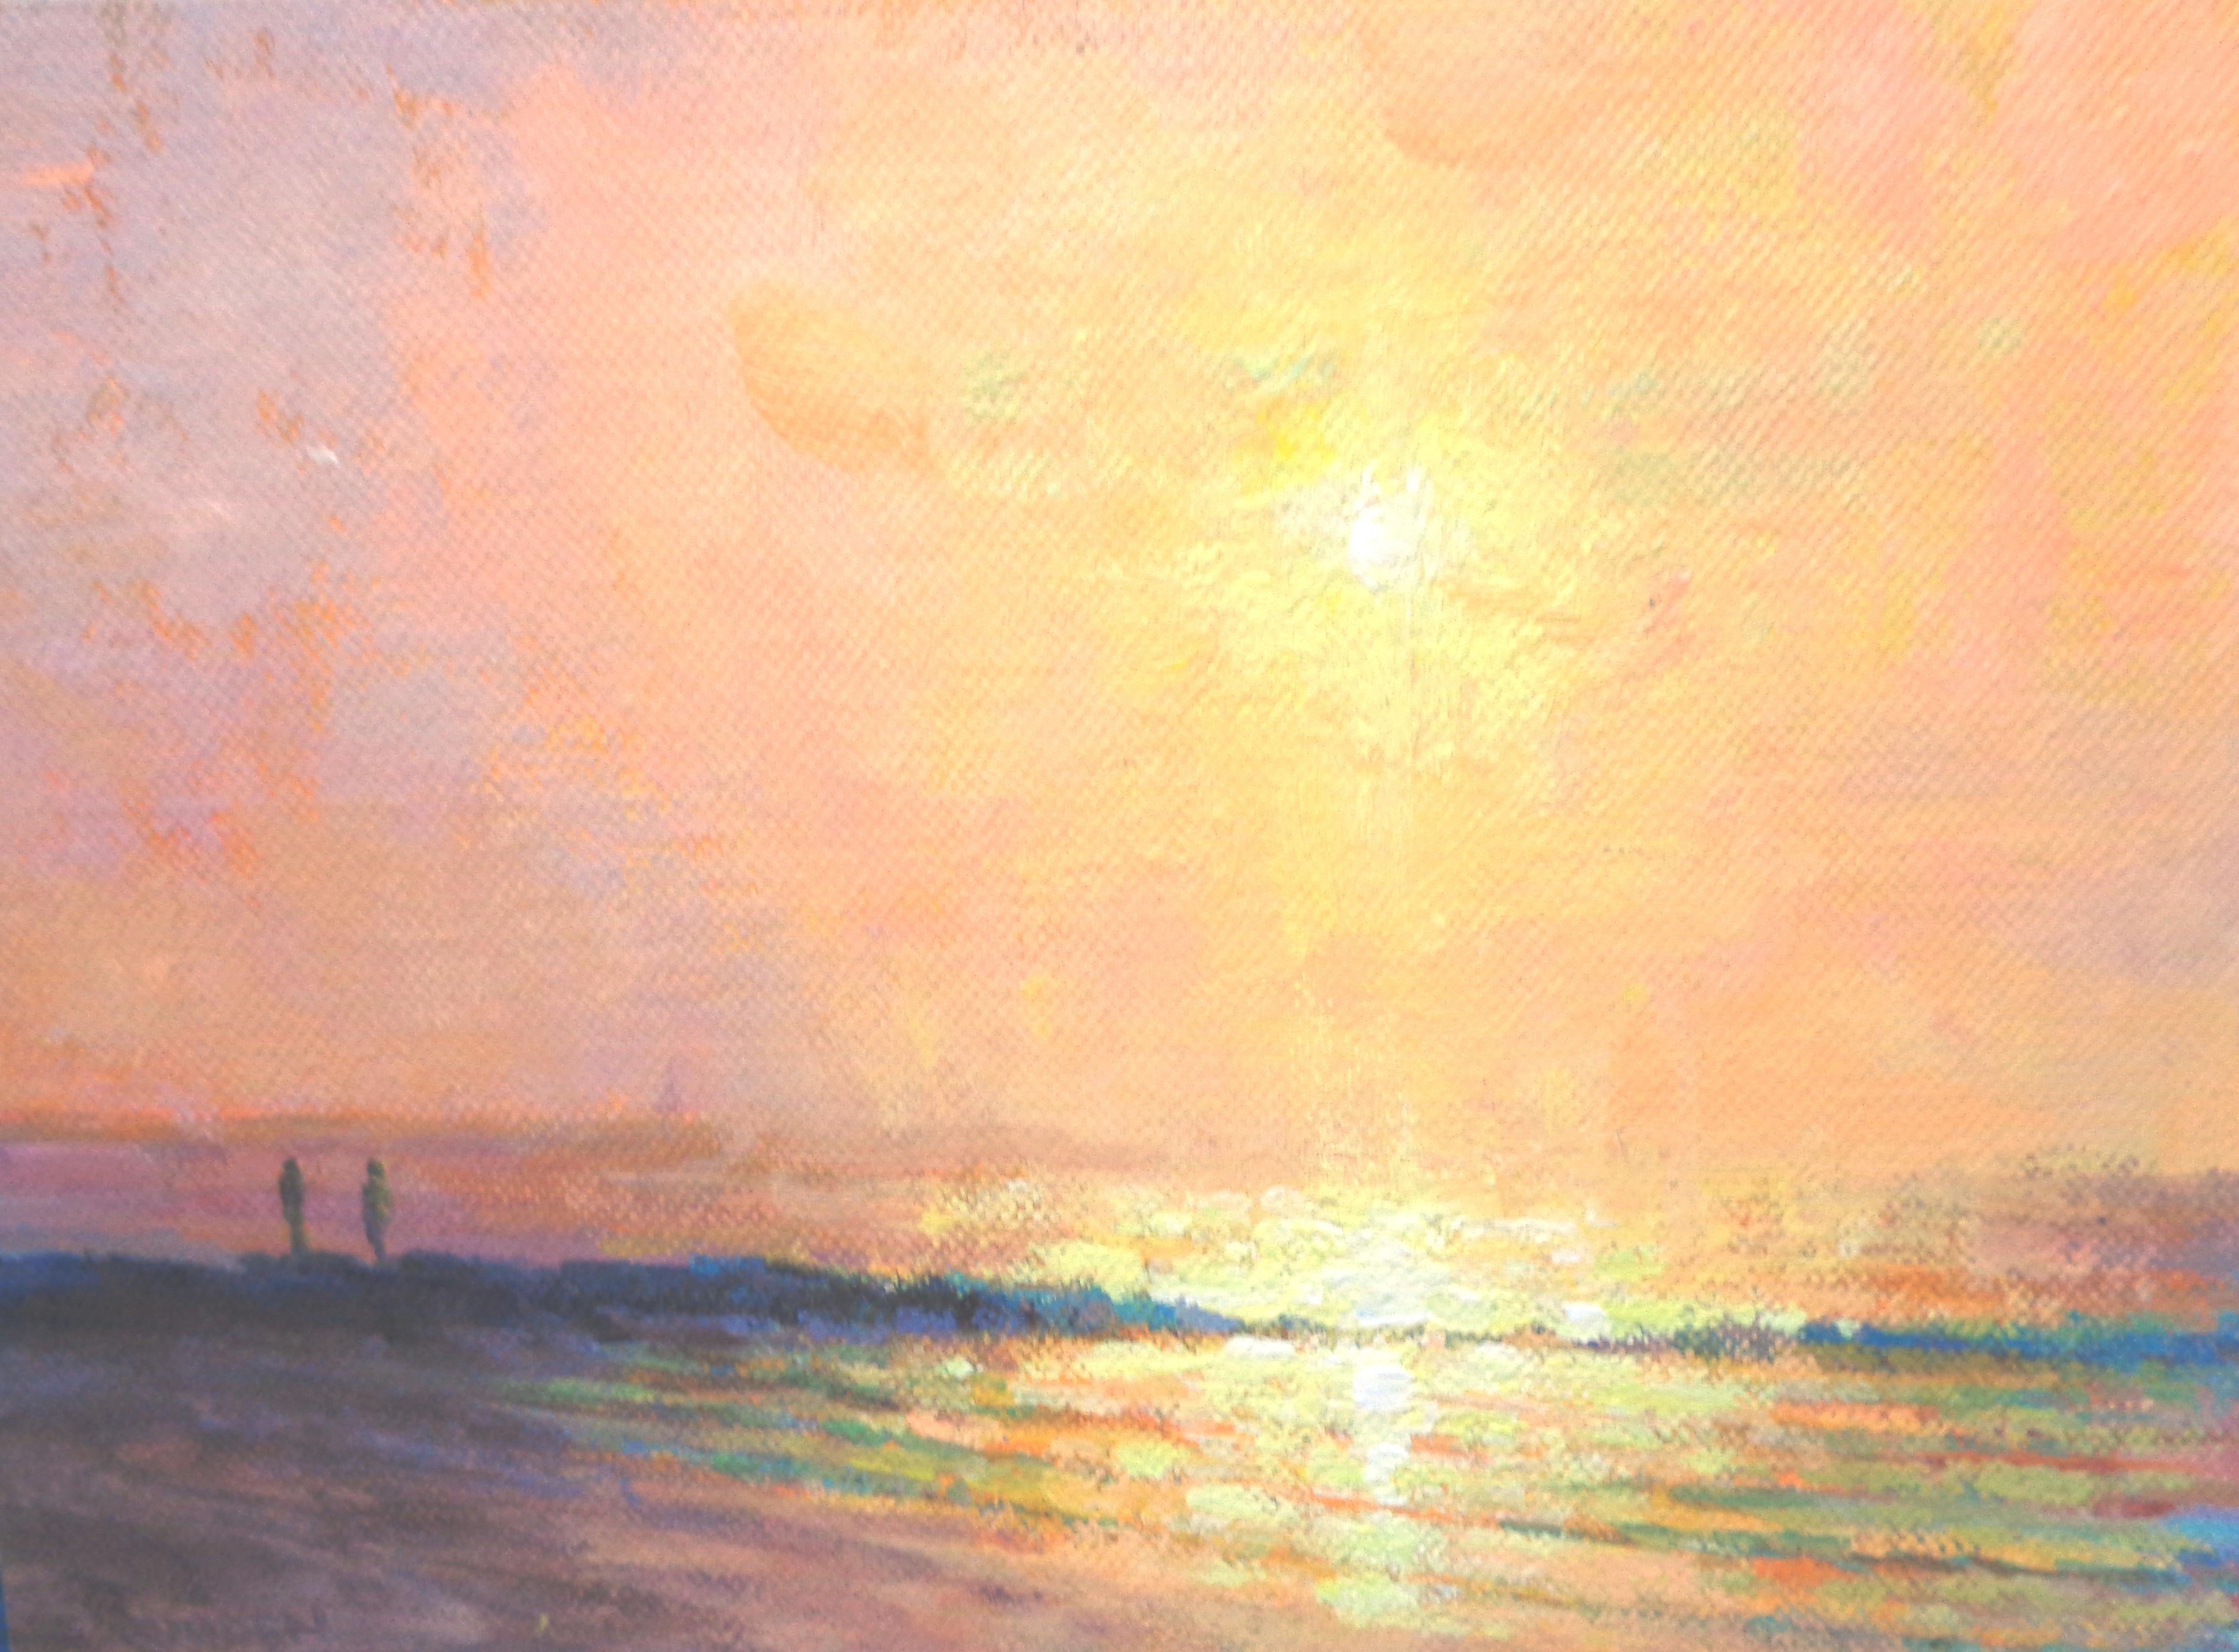 Ocean Beach Impressionistic Seacape Sunrise Oil Painting by Michael Budden 3